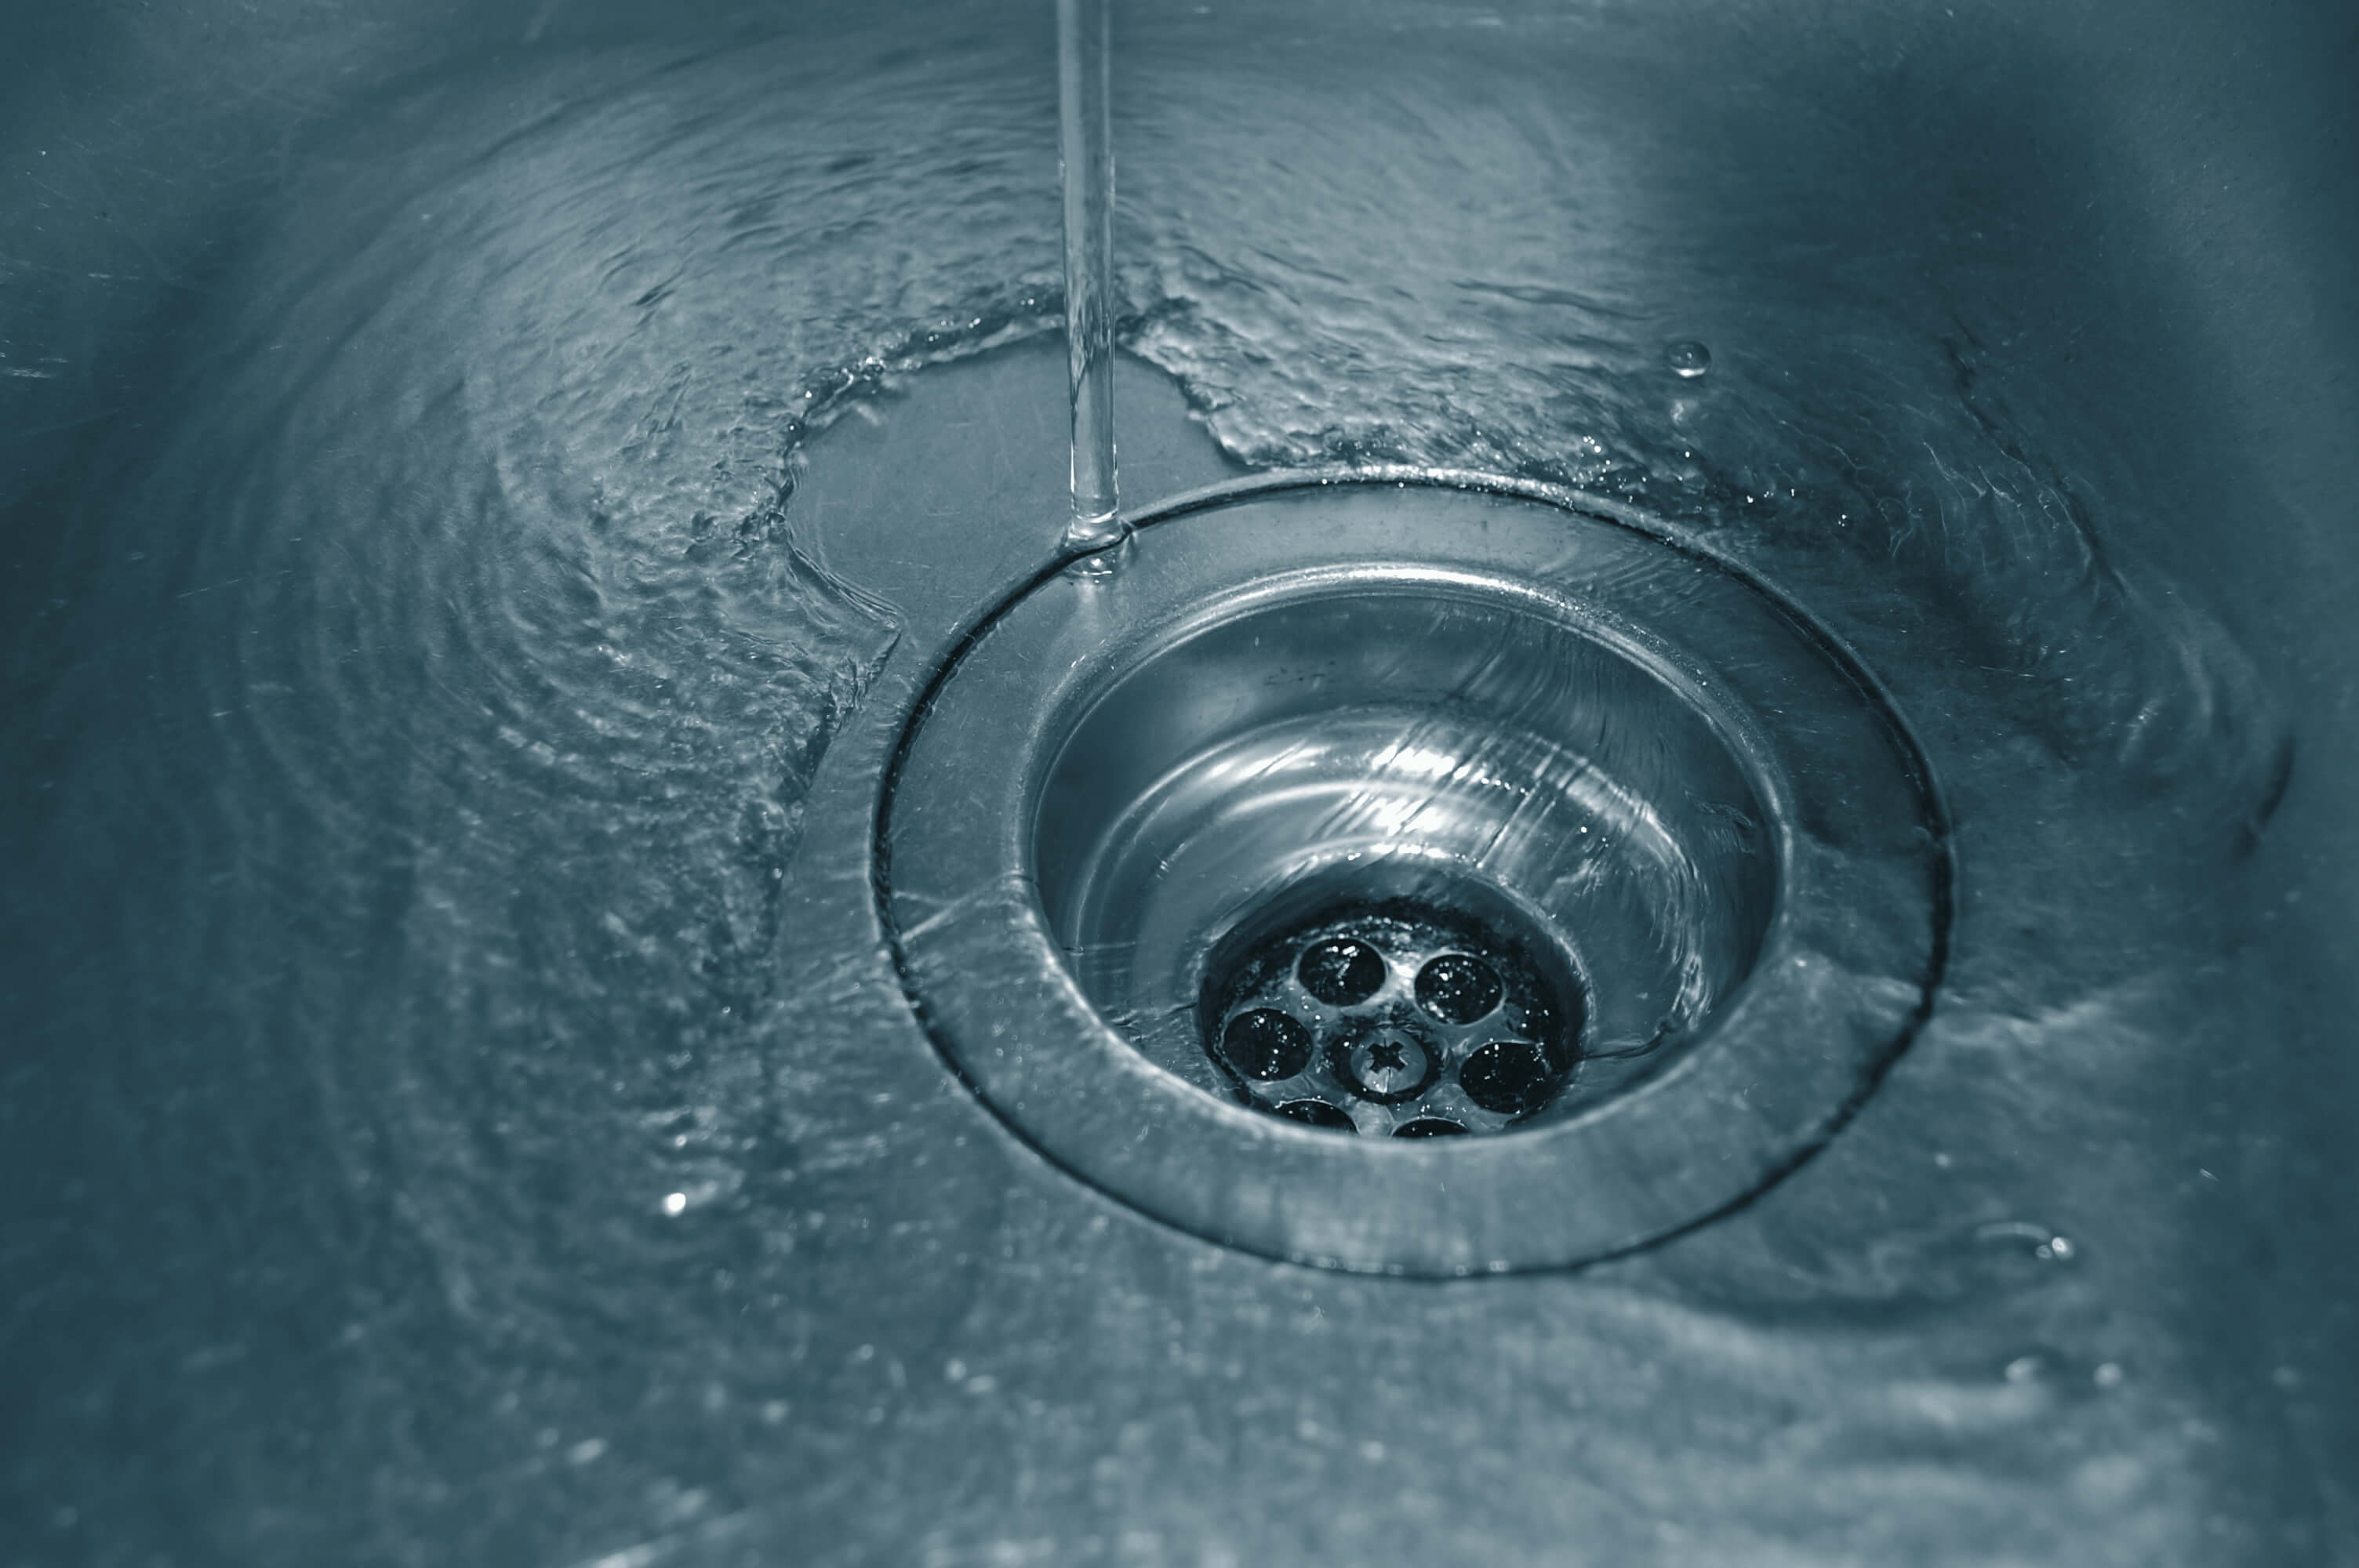 Cleansing Your Sewer Line and Drains